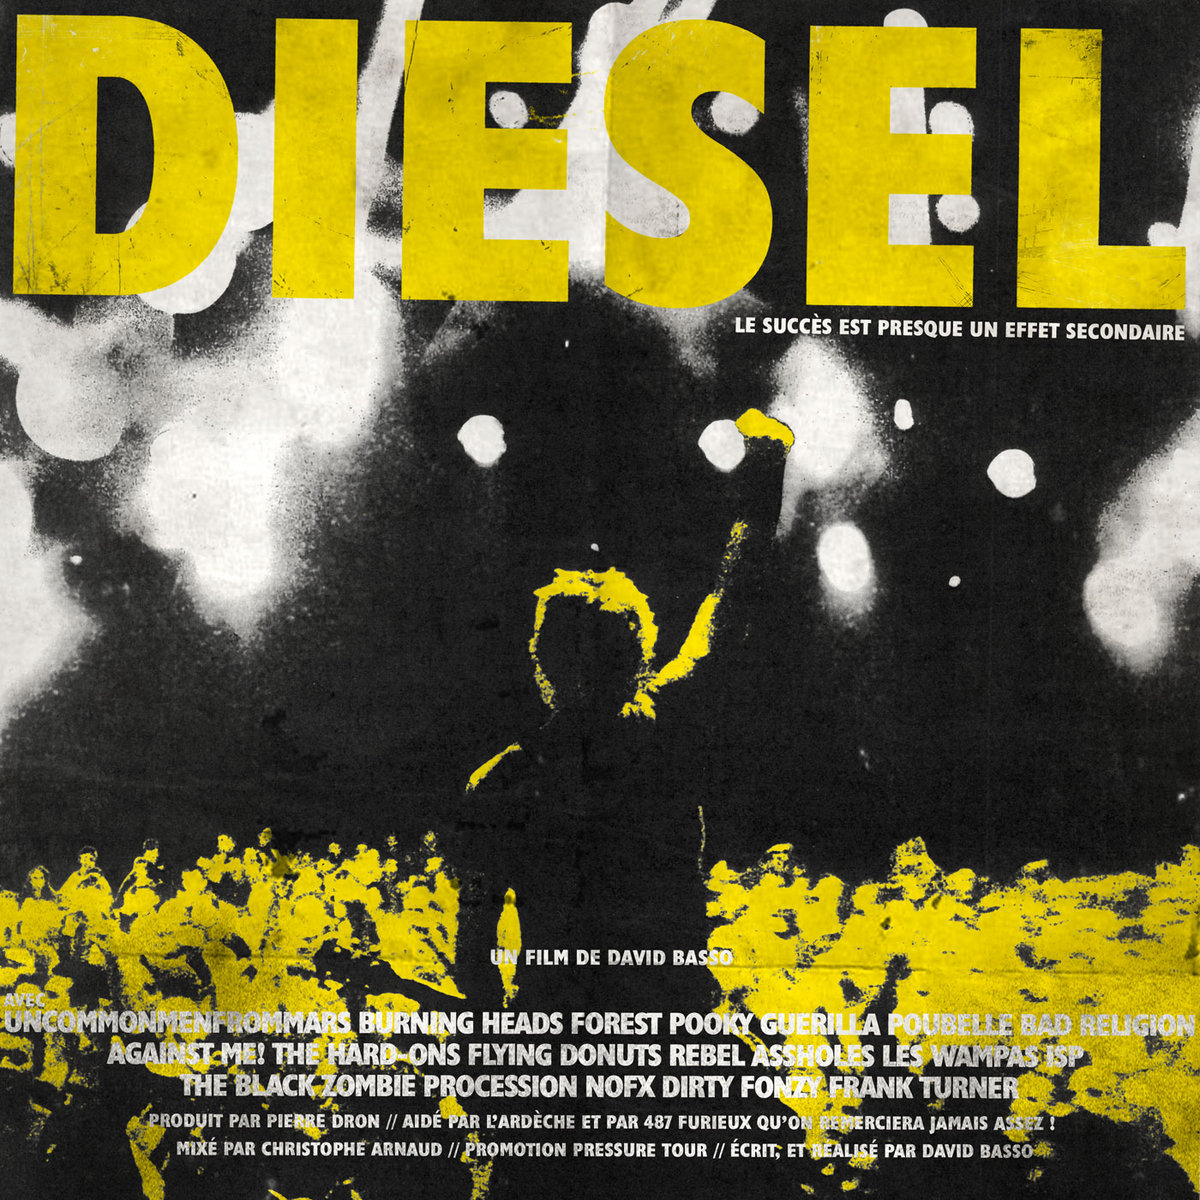 diesel, le film, forest pooky